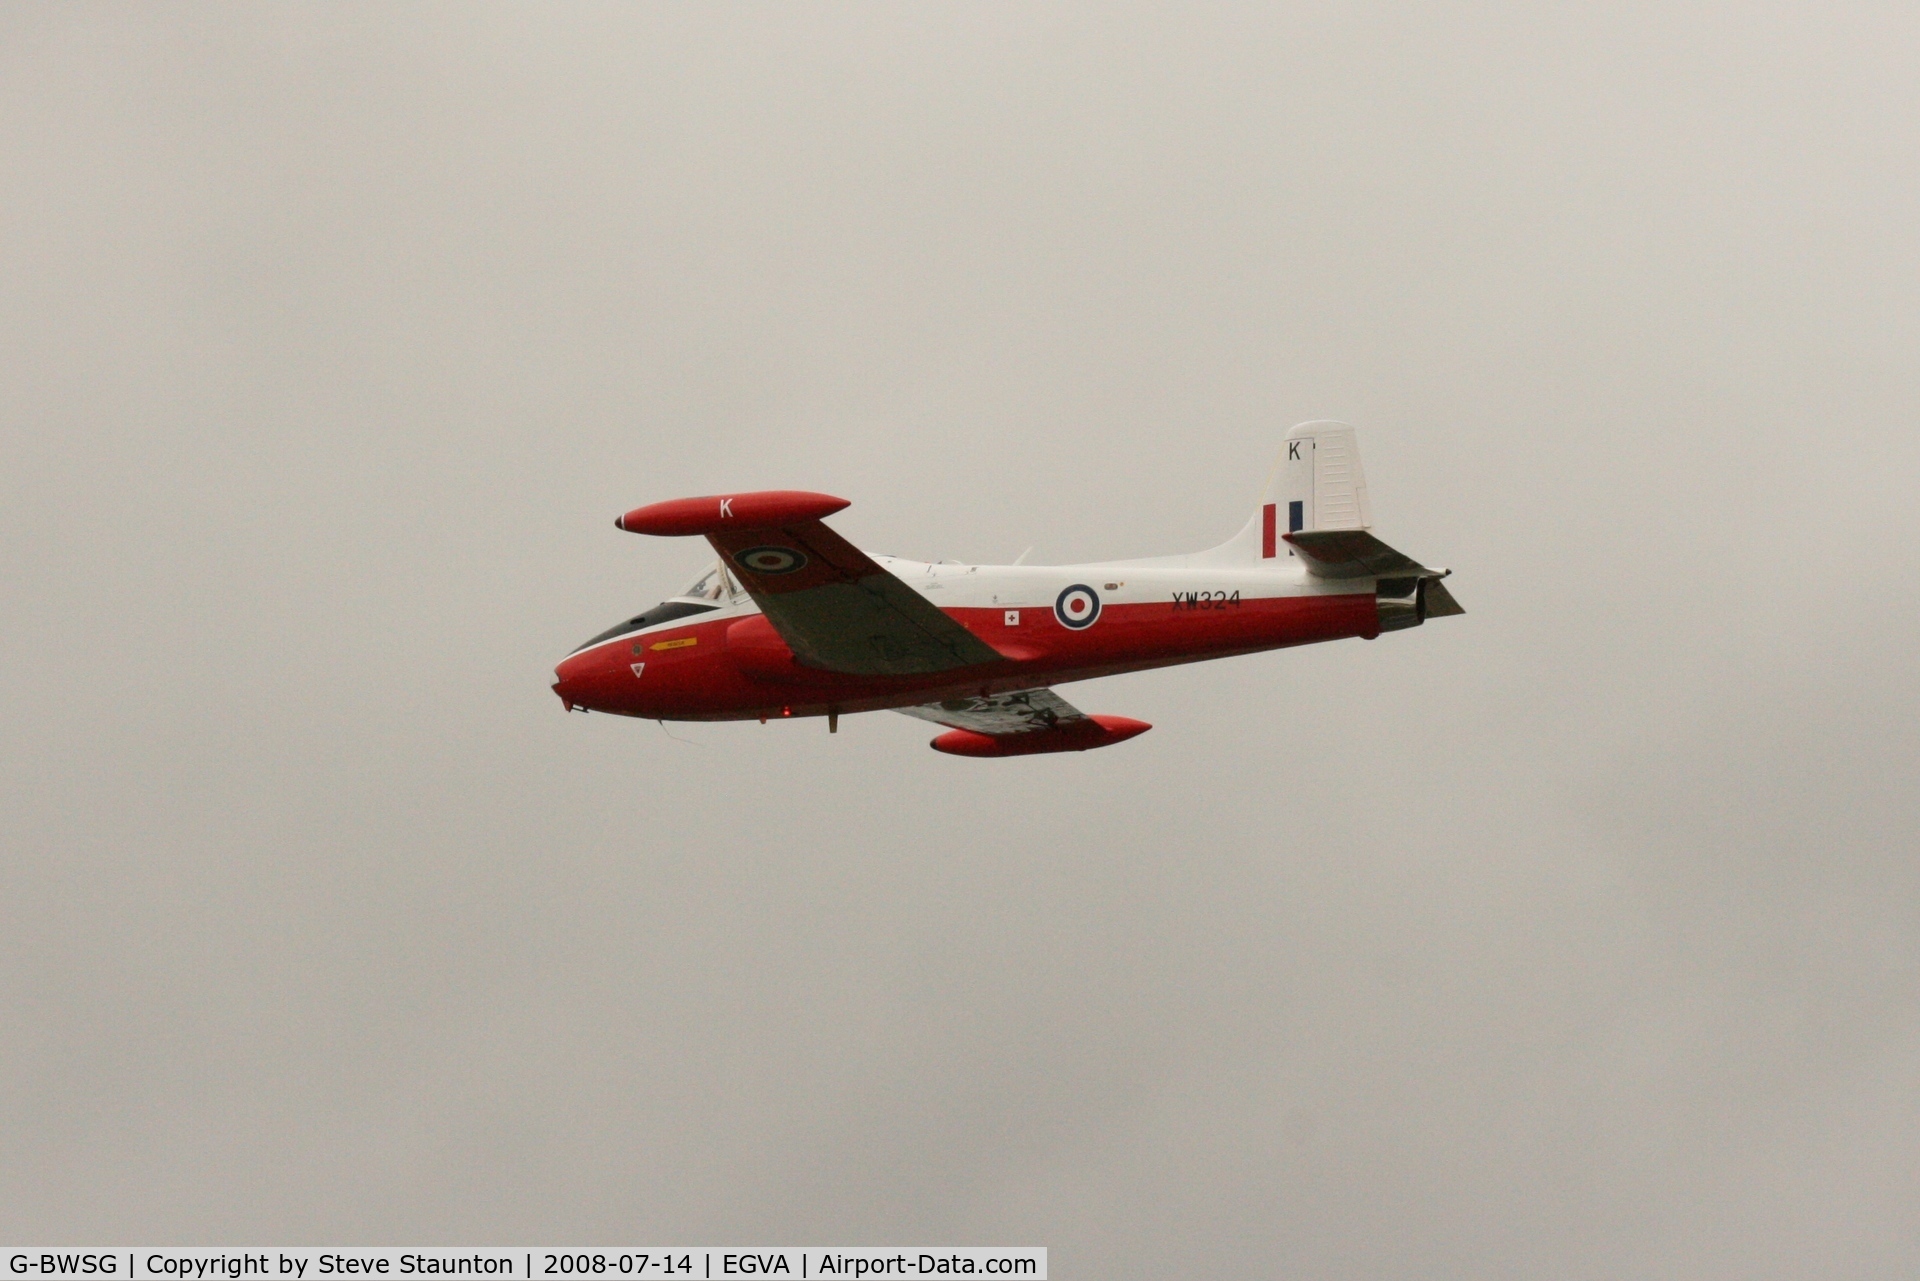 G-BWSG, 1970 BAC 84 Jet Provost T.5 C/N EEP/JP/988, Taken at the Royal International Air Tattoo 2008 during arrivals and departures (show days cancelled due to bad weather)